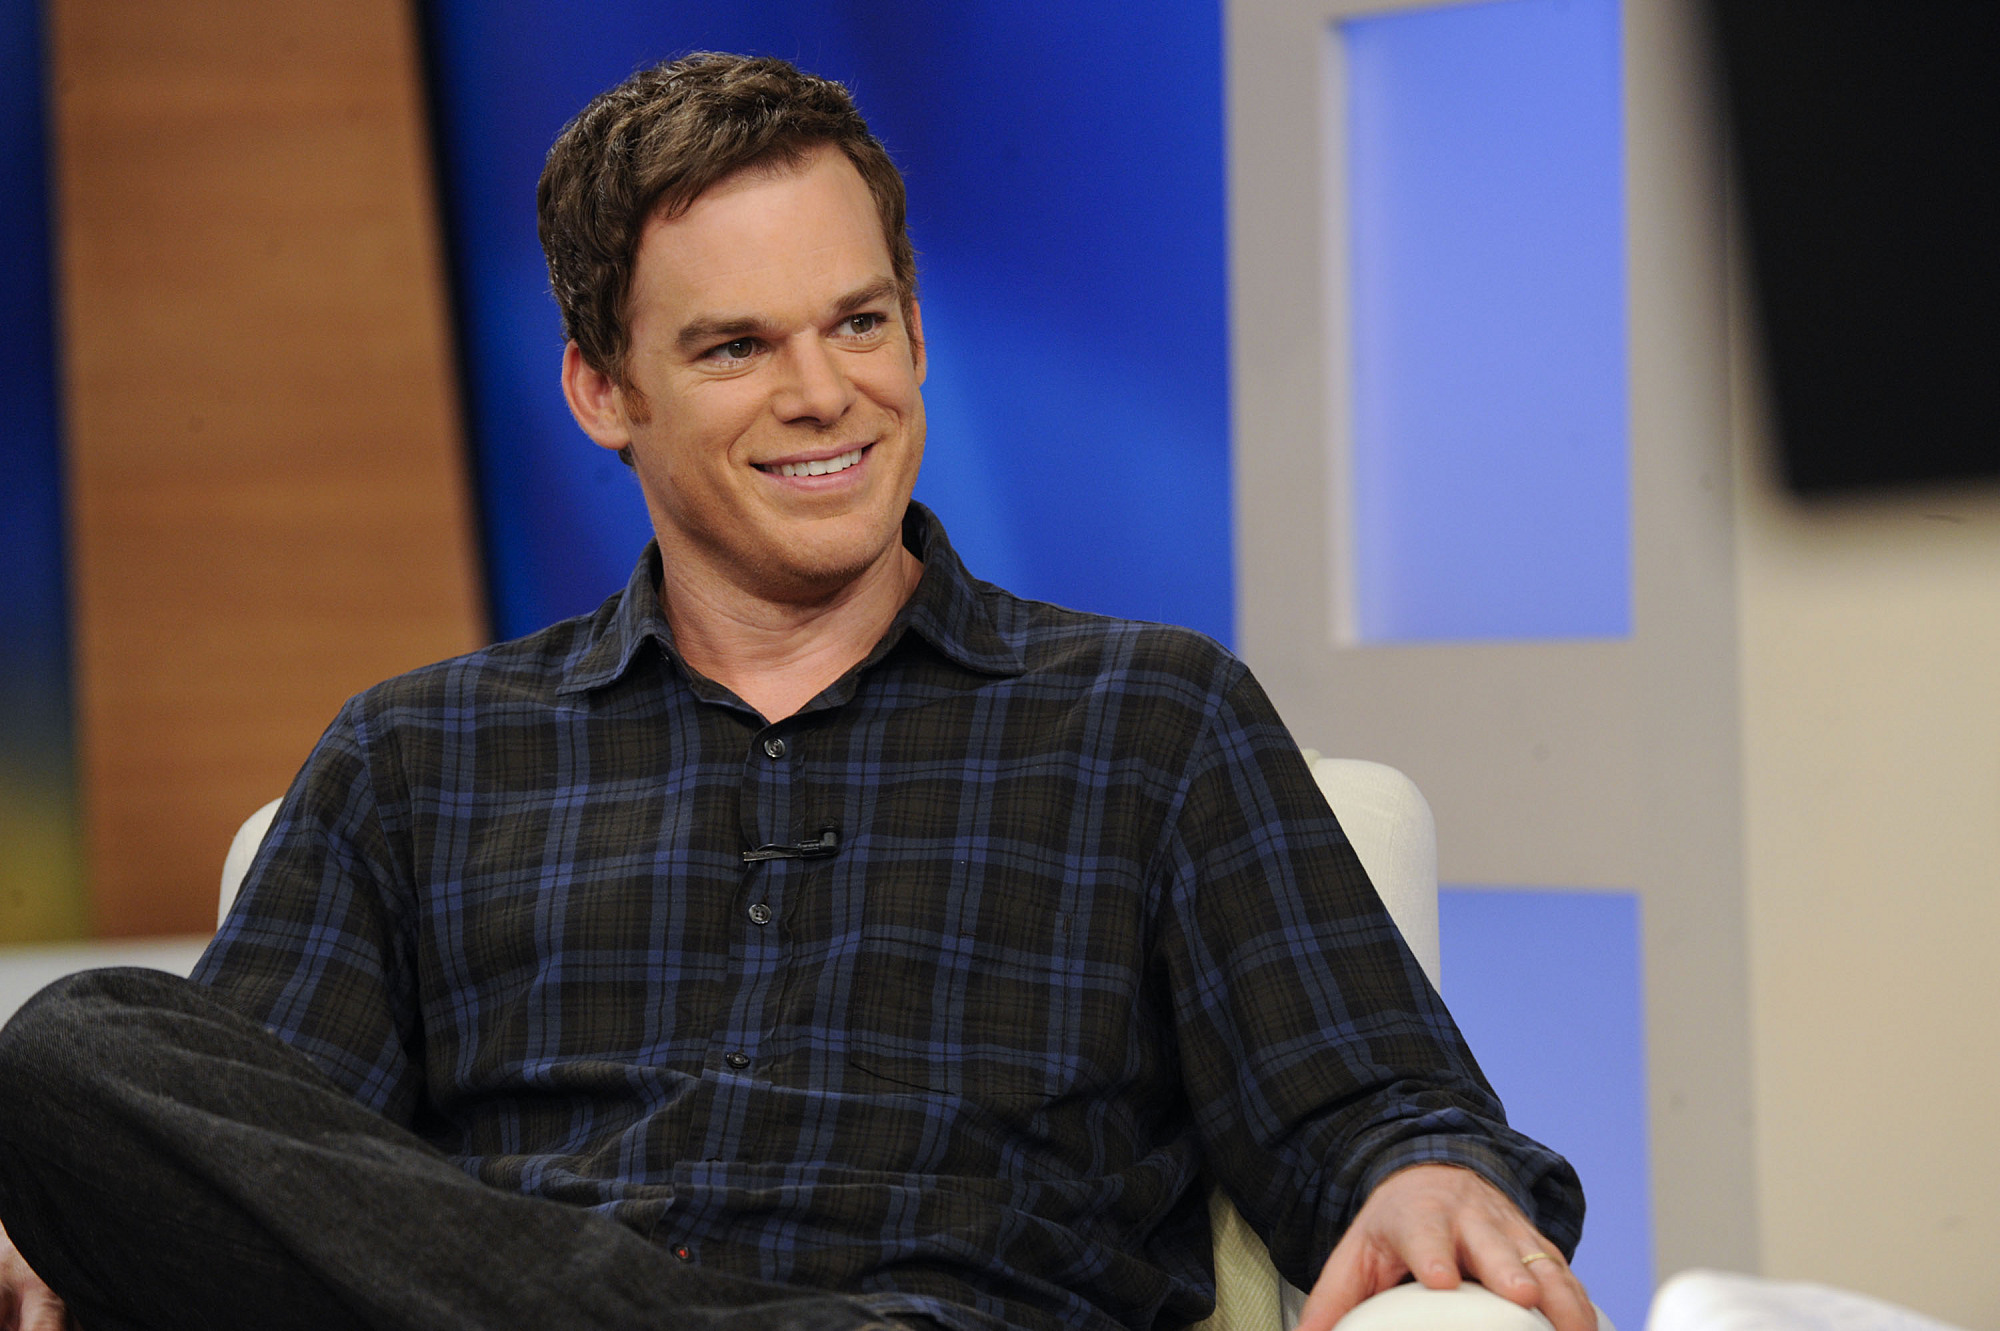 Michael C. Hall sits in a chair with his legs crossed wearing a black and blue plaid shirt.